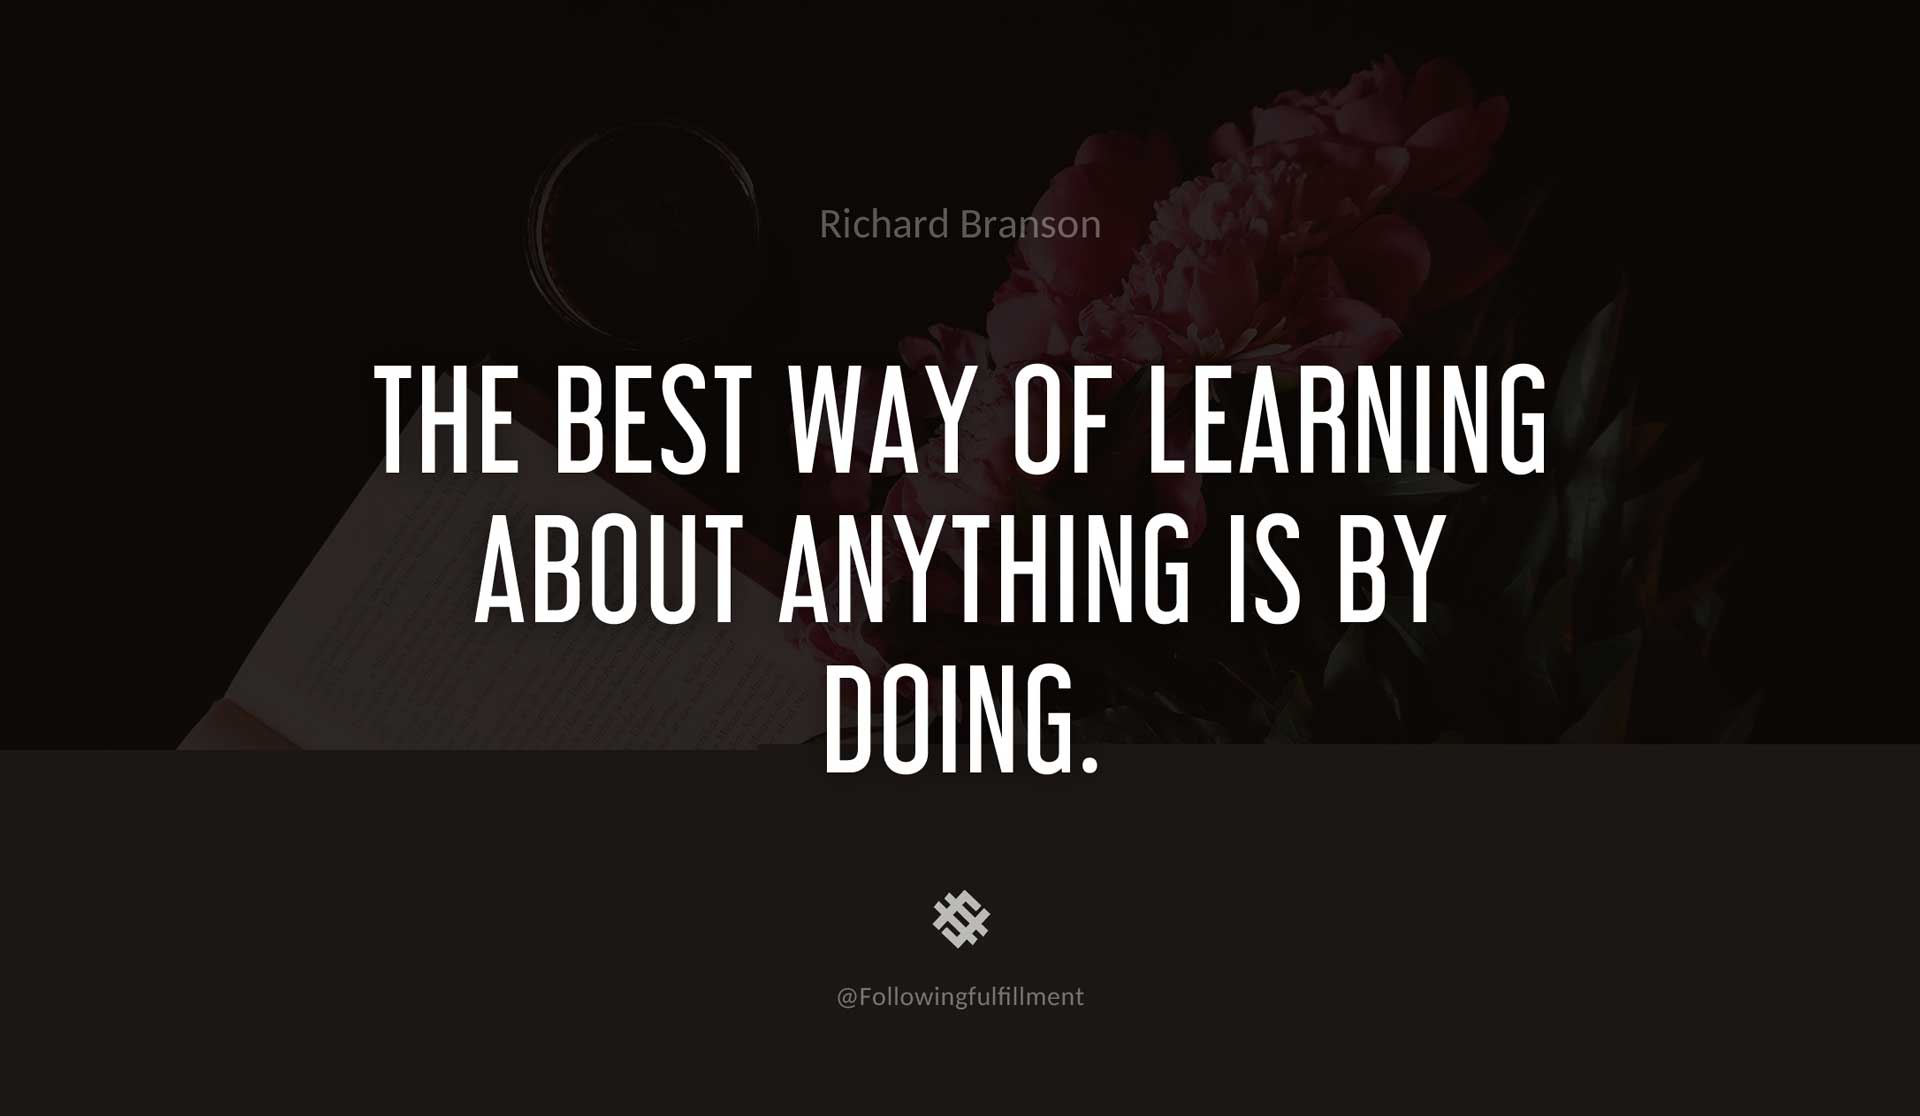 The-best-way-of-learning-about-anything-is-by-doing.-RICHARD-BRANSON-Quote.jpg